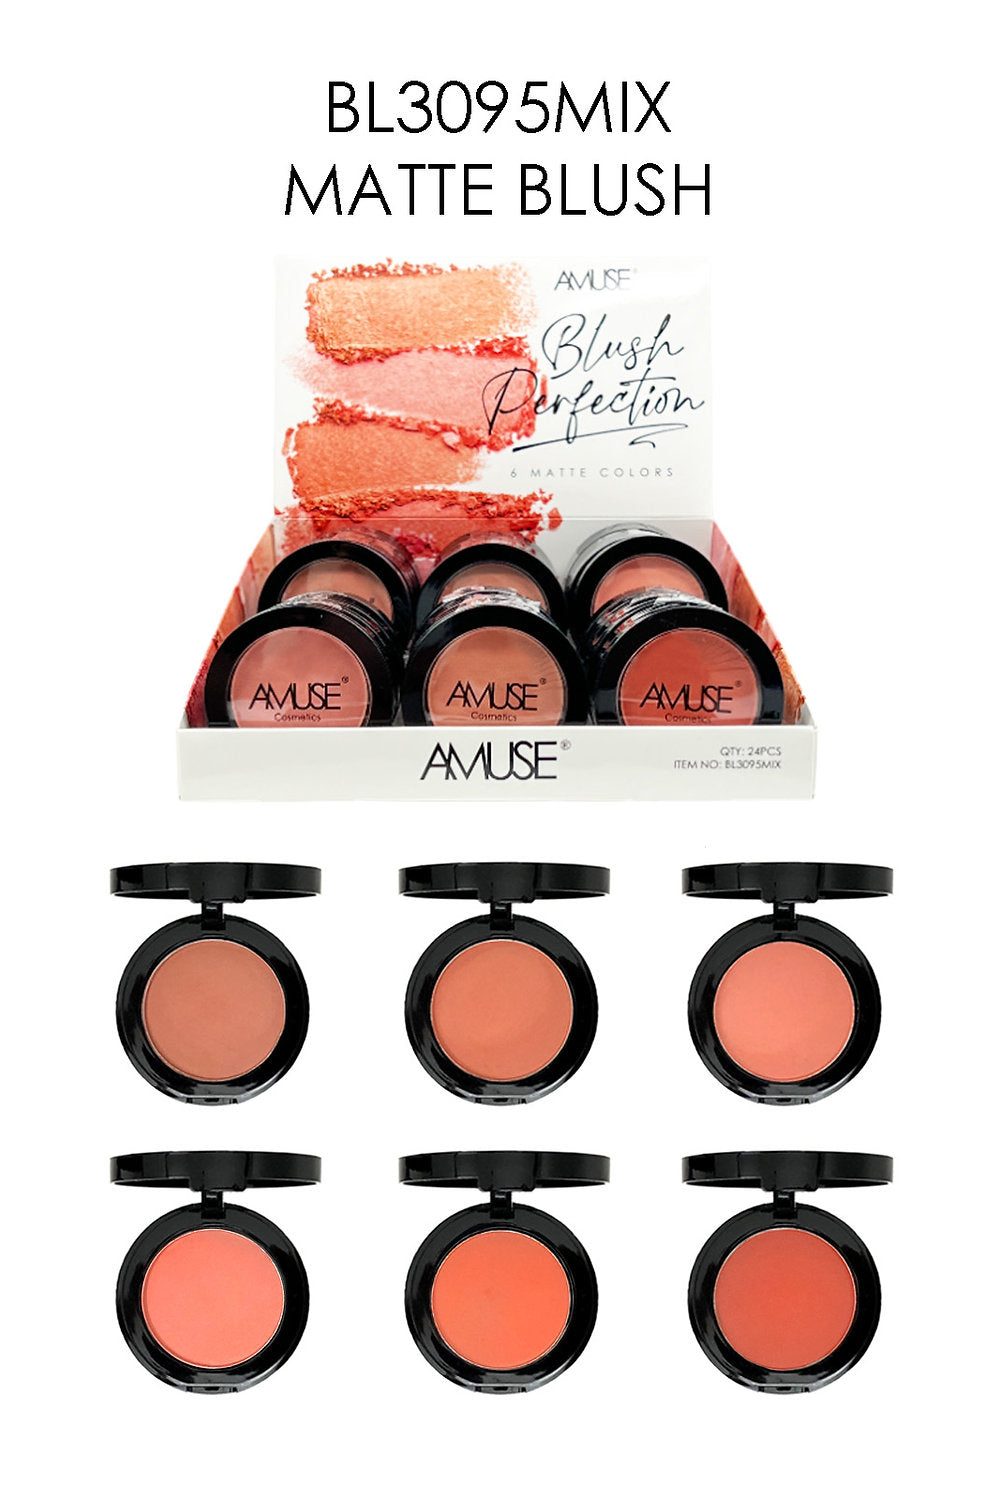 AMUSE BLUSH PERFECTION 6 COLORES MATE - DISPLAY 24 UDS